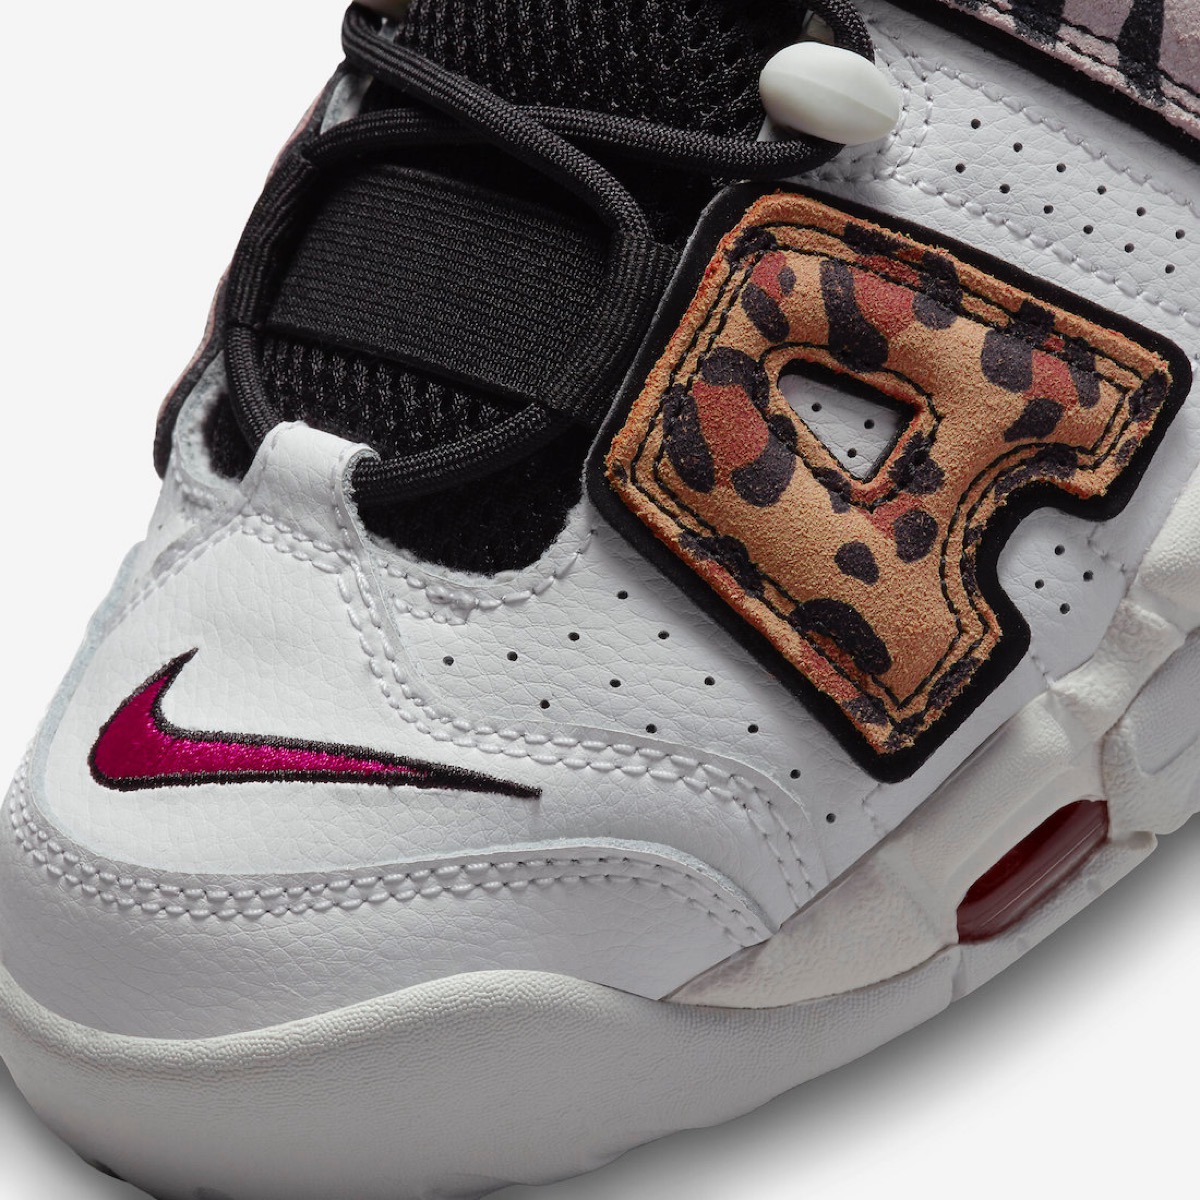 Nike Air More Uptempo '96 “Animal”が国内11月16日より発売予定